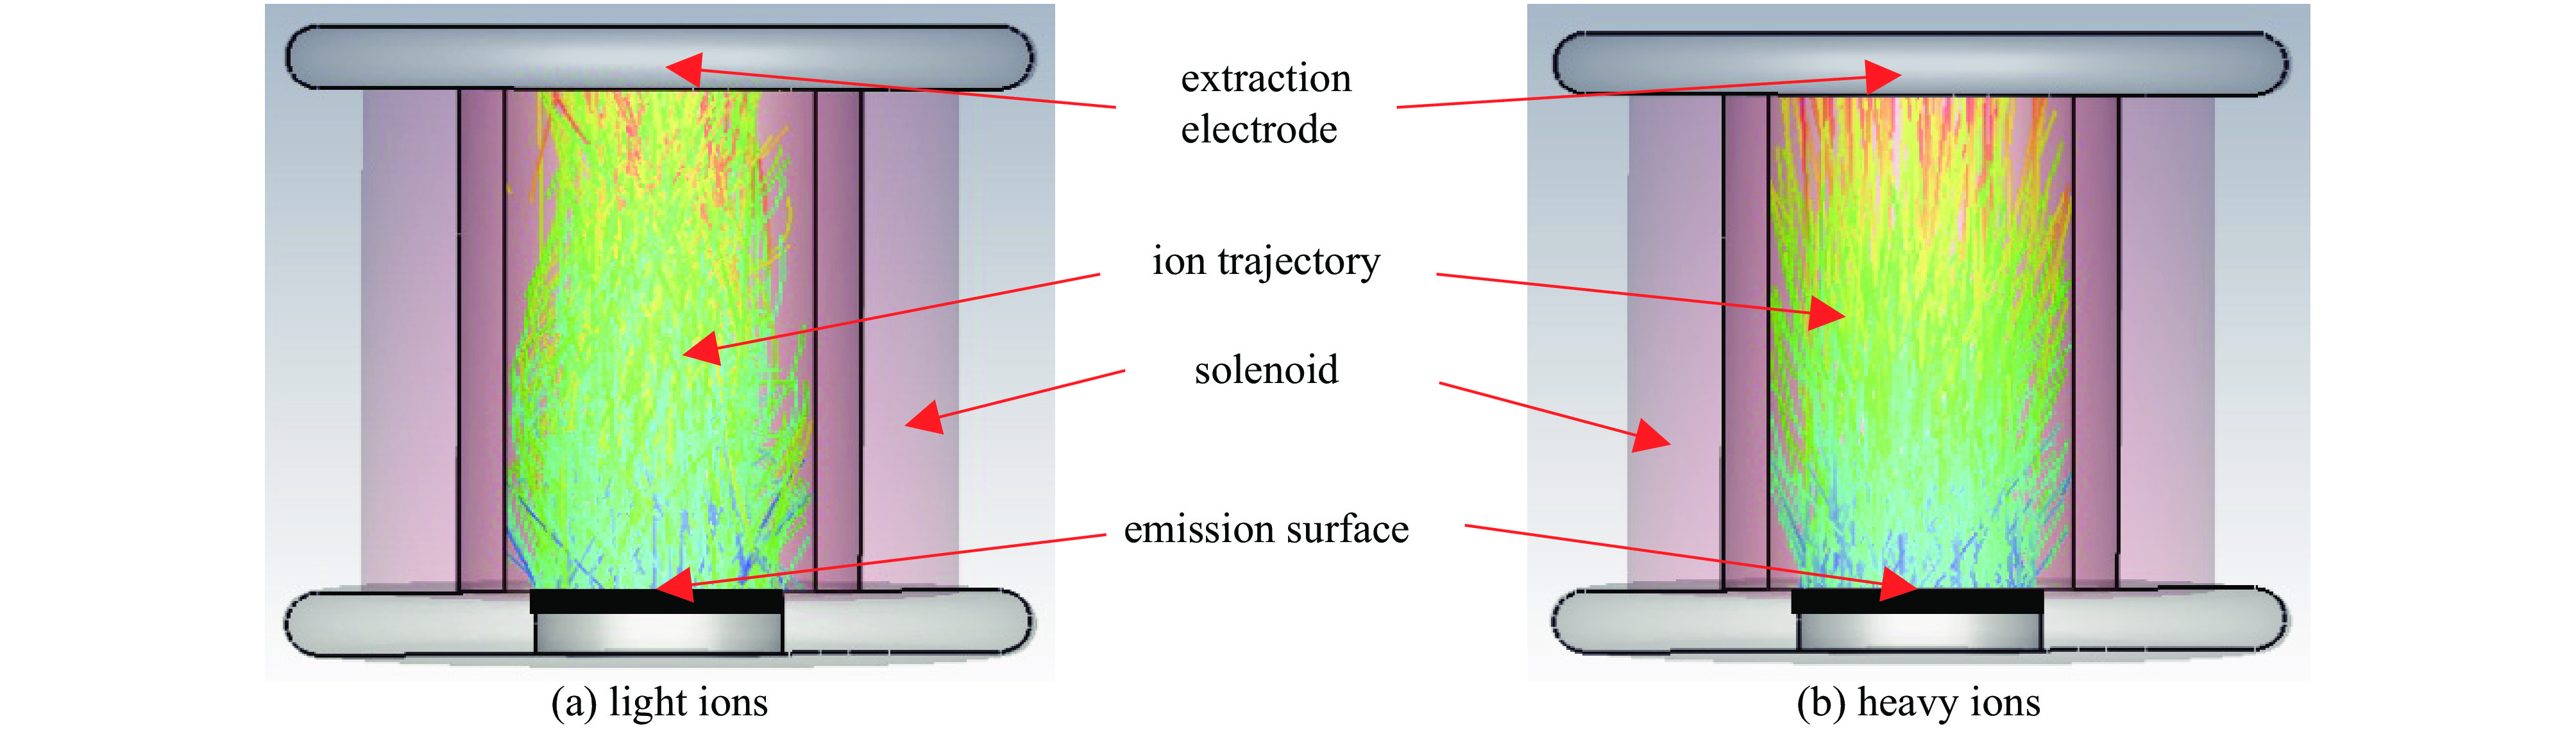 Trajectory of light and heavy ions in the axial magnetic field of solenoid